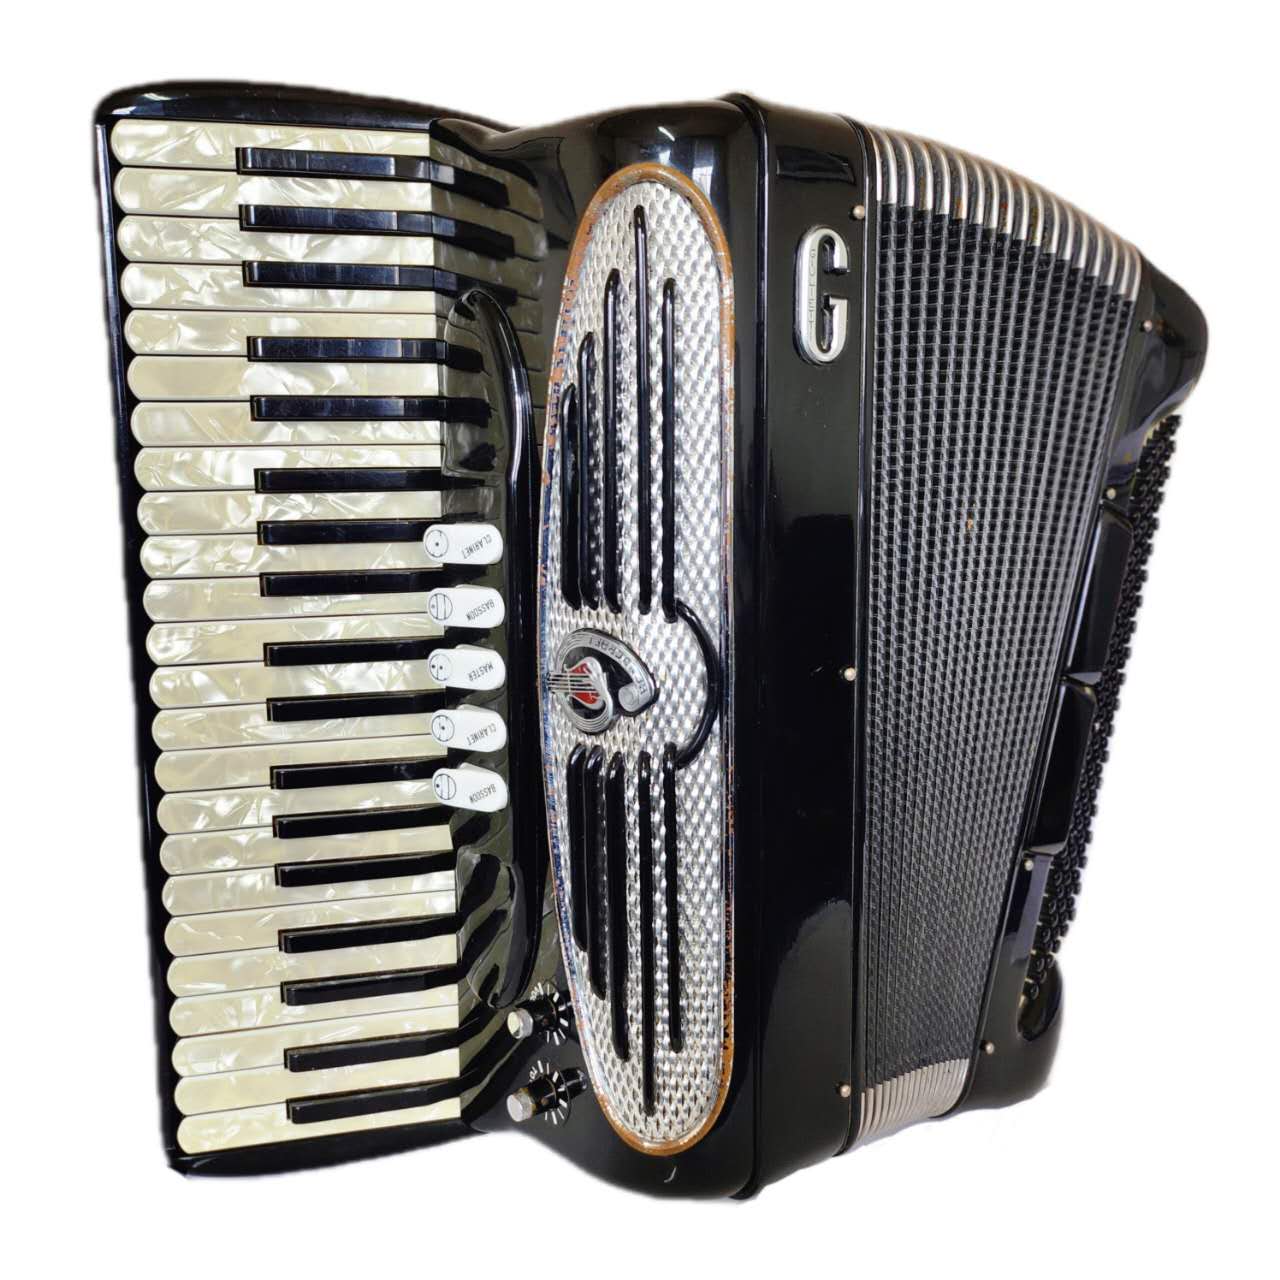 Giolitti 120 Bass, Lady Model with microphone Piano Accordion | Second-Hand